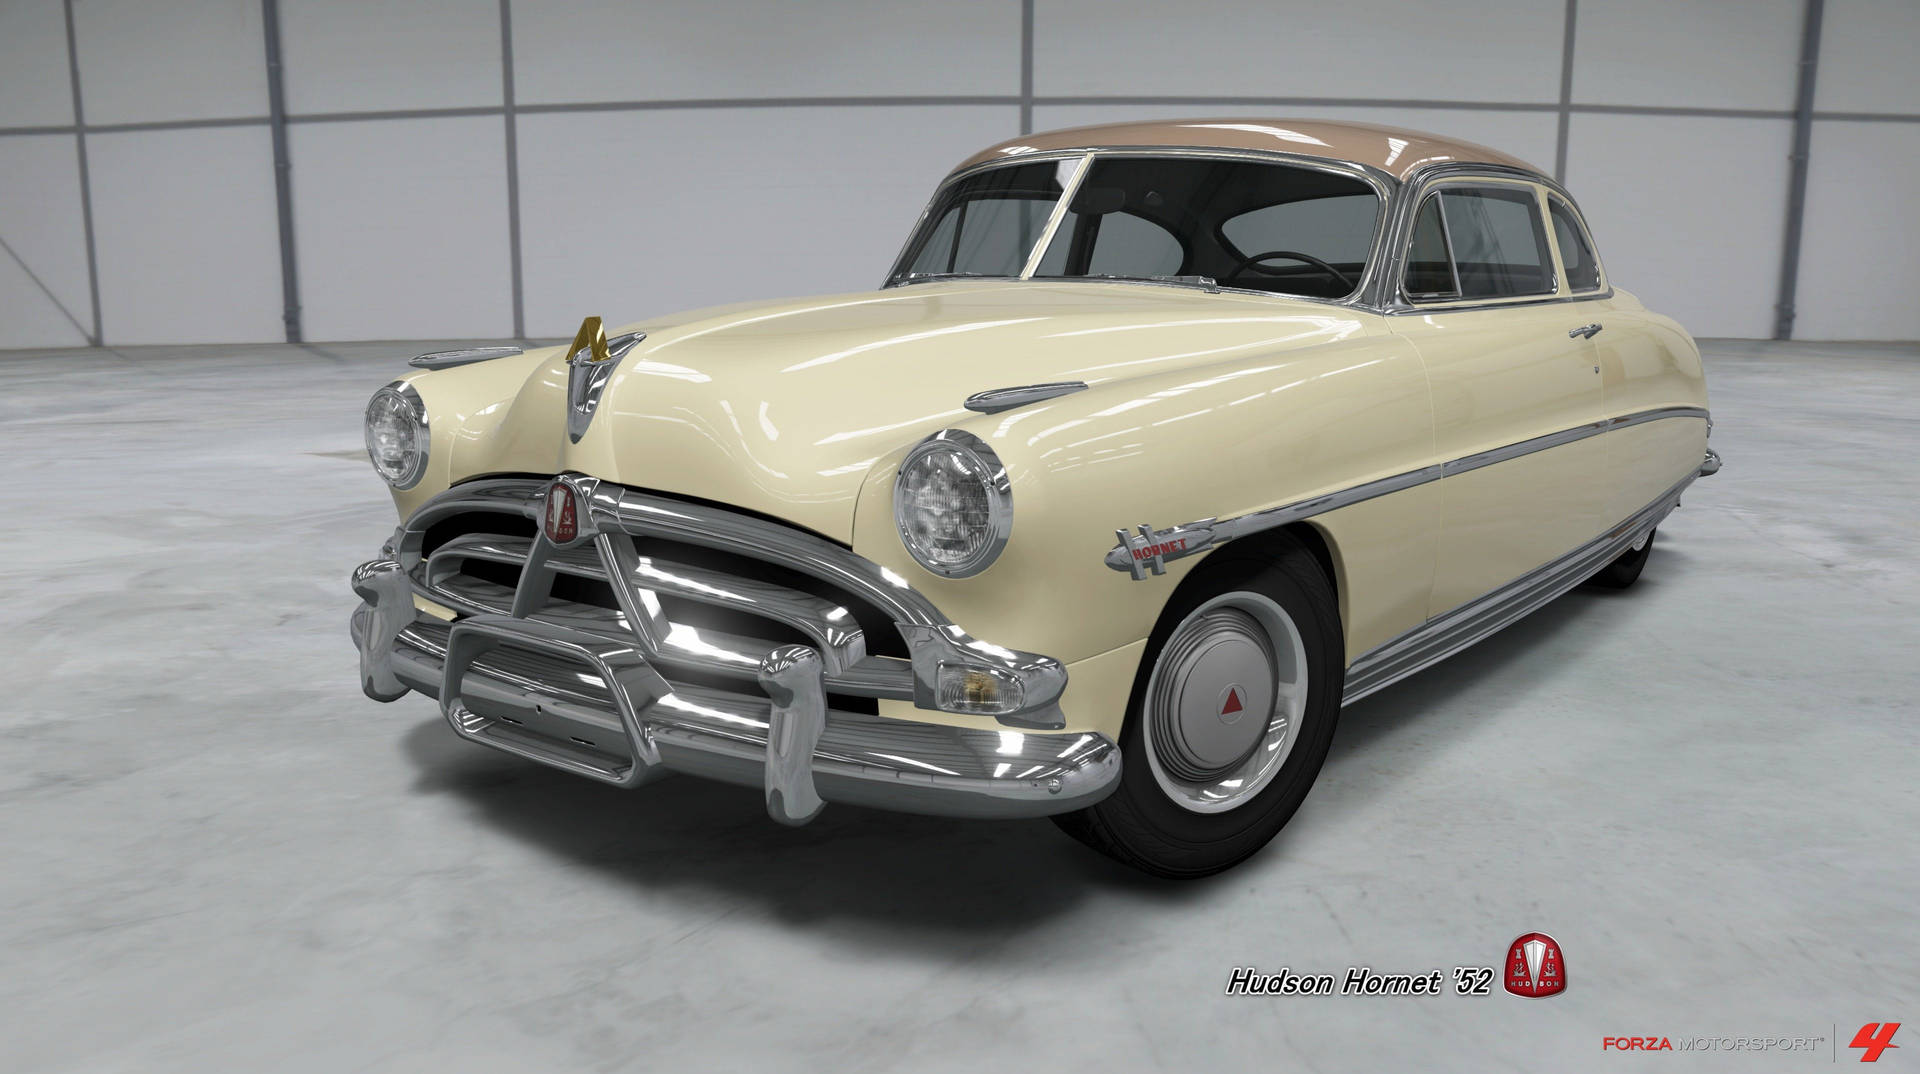 Caption: Racing Excellence: The Mighty Hudson Hornet In Forza Horizon 4 Background